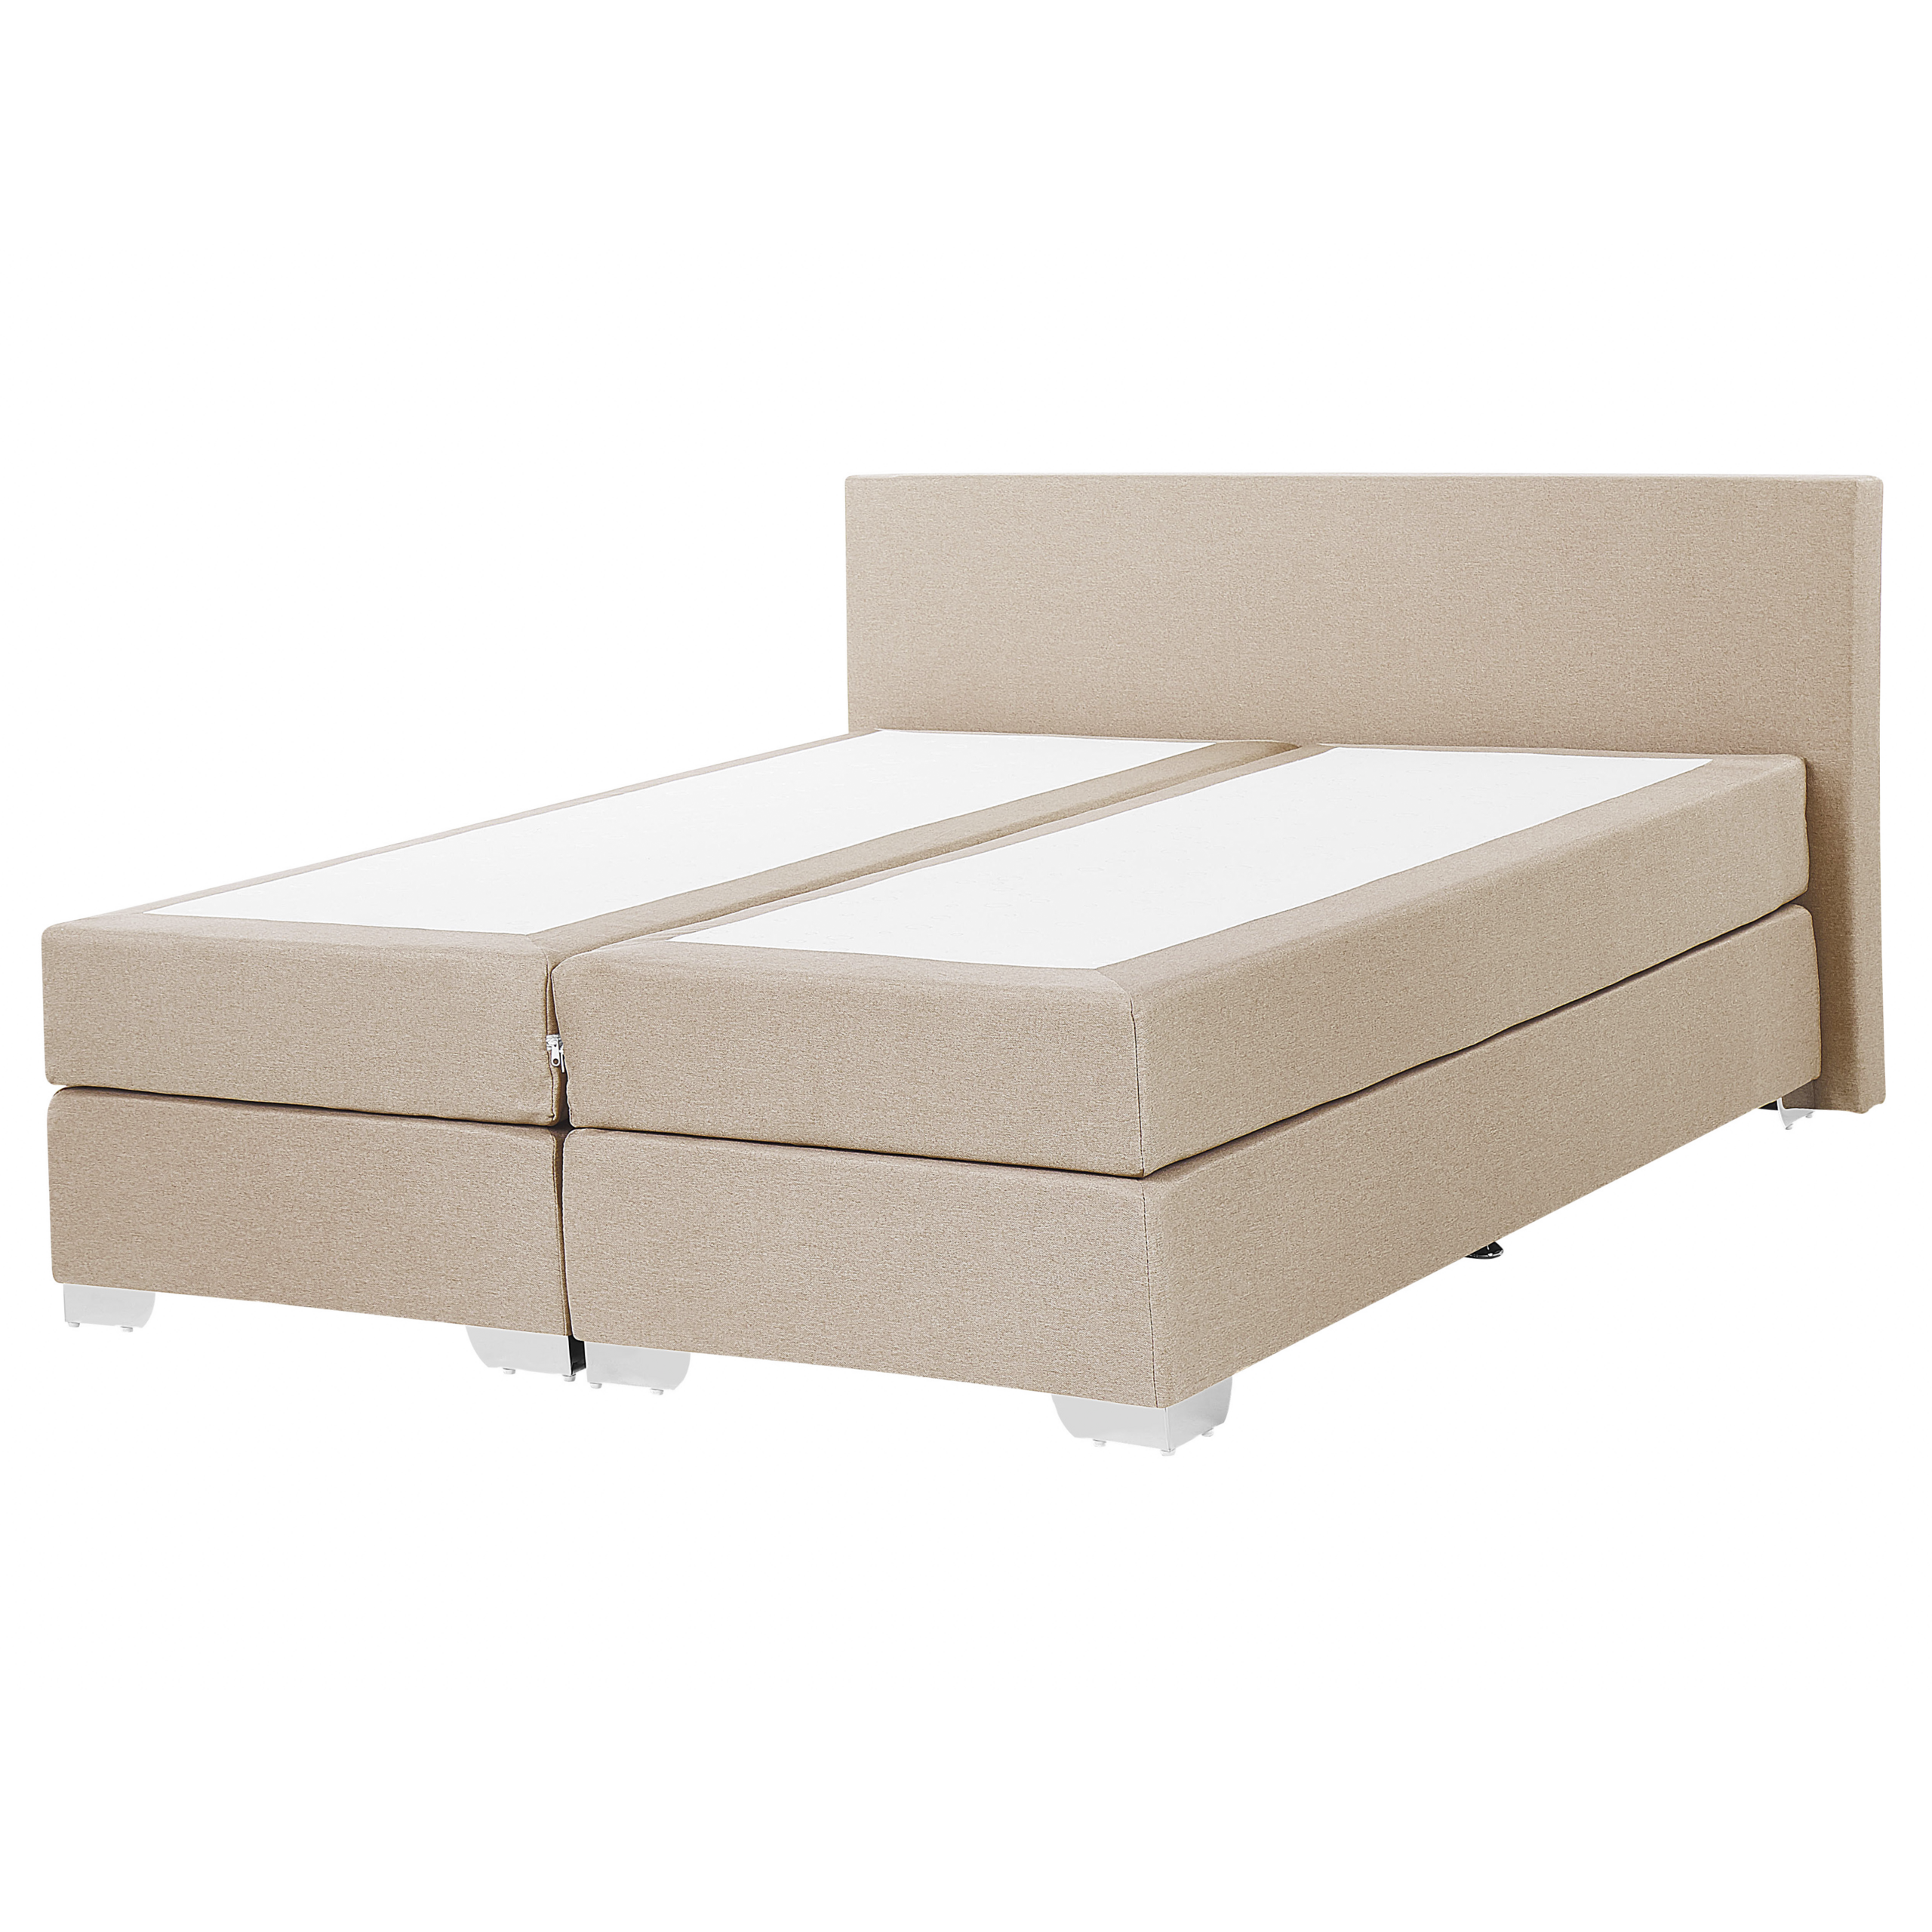 Beliani EU King Size Continental Bed 5ft3 Beige Fabric with Pocket Spring Mattress